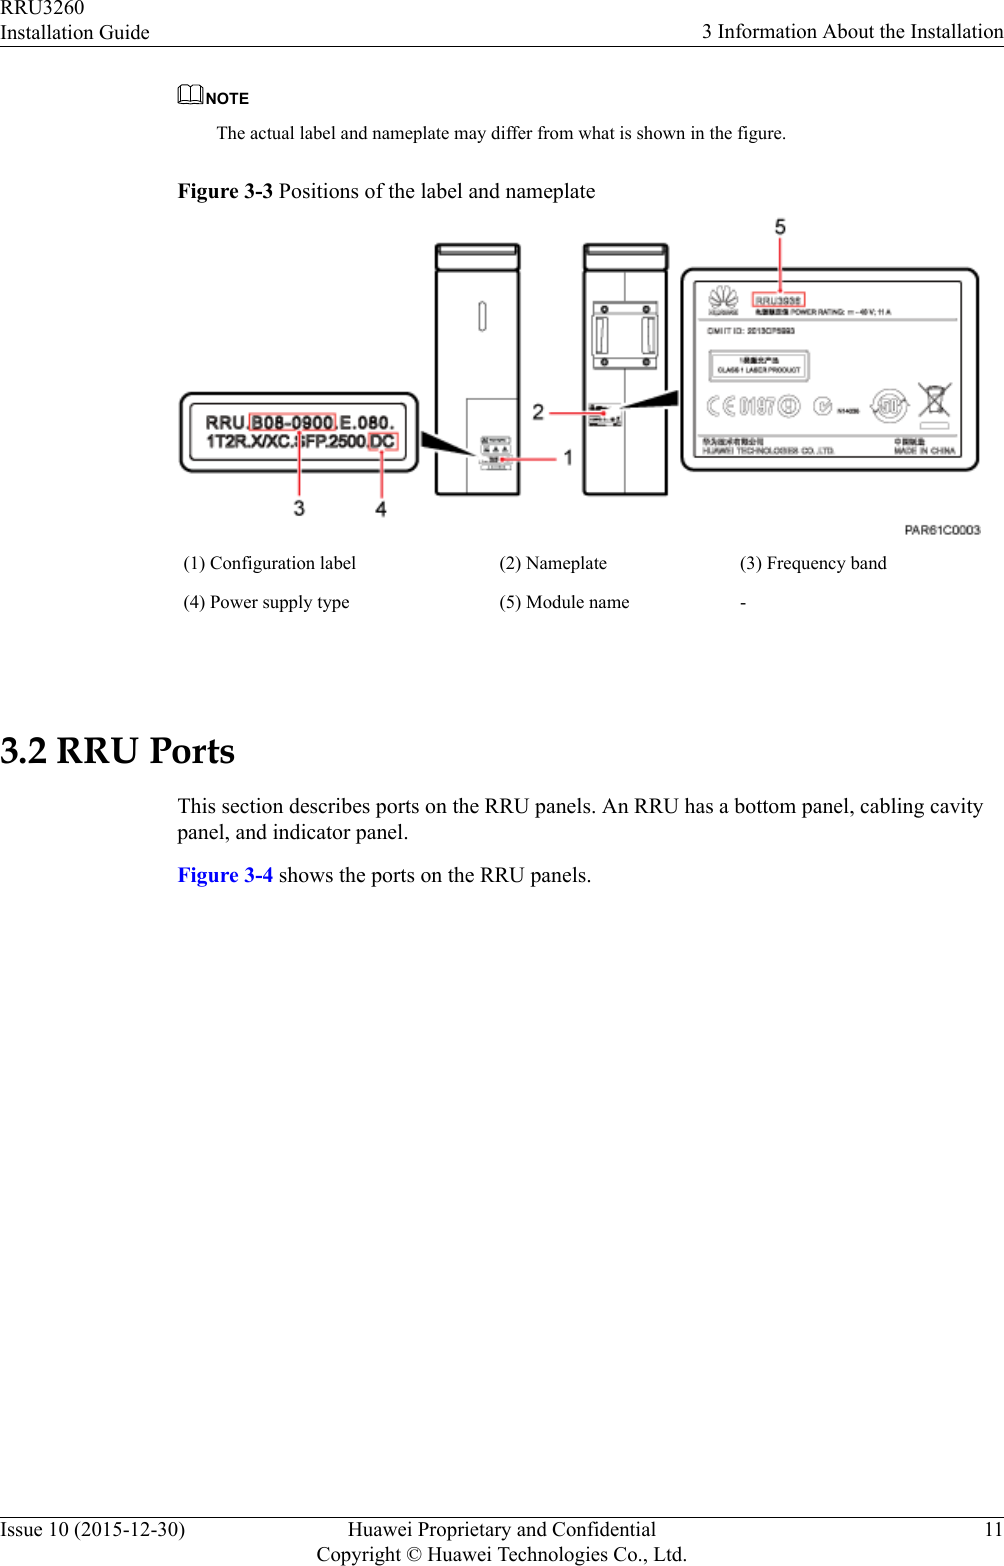 NOTEThe actual label and nameplate may differ from what is shown in the figure.Figure 3-3 Positions of the label and nameplate(1) Configuration label (2) Nameplate (3) Frequency band(4) Power supply type (5) Module name - 3.2 RRU PortsThis section describes ports on the RRU panels. An RRU has a bottom panel, cabling cavitypanel, and indicator panel.Figure 3-4 shows the ports on the RRU panels.RRU3260Installation Guide 3 Information About the InstallationIssue 10 (2015-12-30) Huawei Proprietary and ConfidentialCopyright © Huawei Technologies Co., Ltd.11